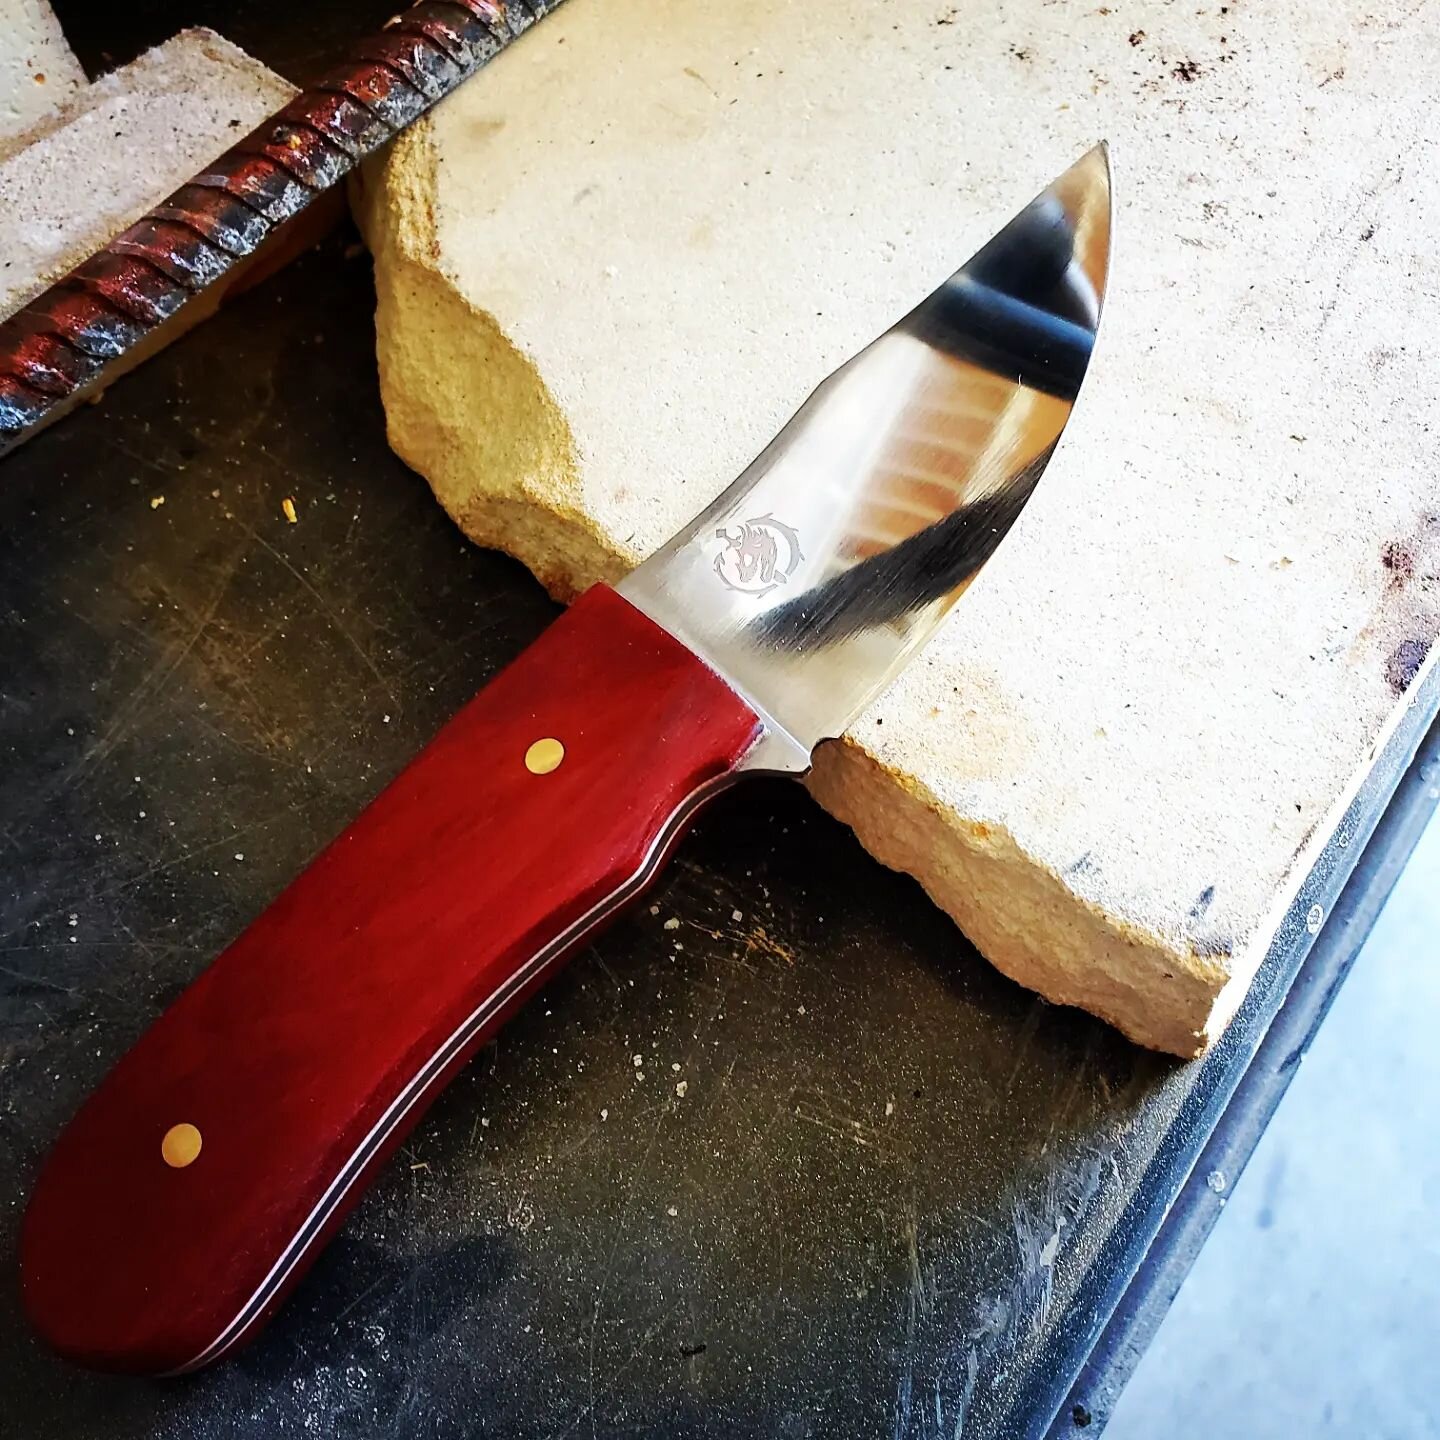 This knife is so polished, a good picture was impossible. How weird is that?

52100, padauk, white G10. 

Reminiscent of the first knife I ever sold, and another step forward in the craft.

My books are temporarily open. Send a message.